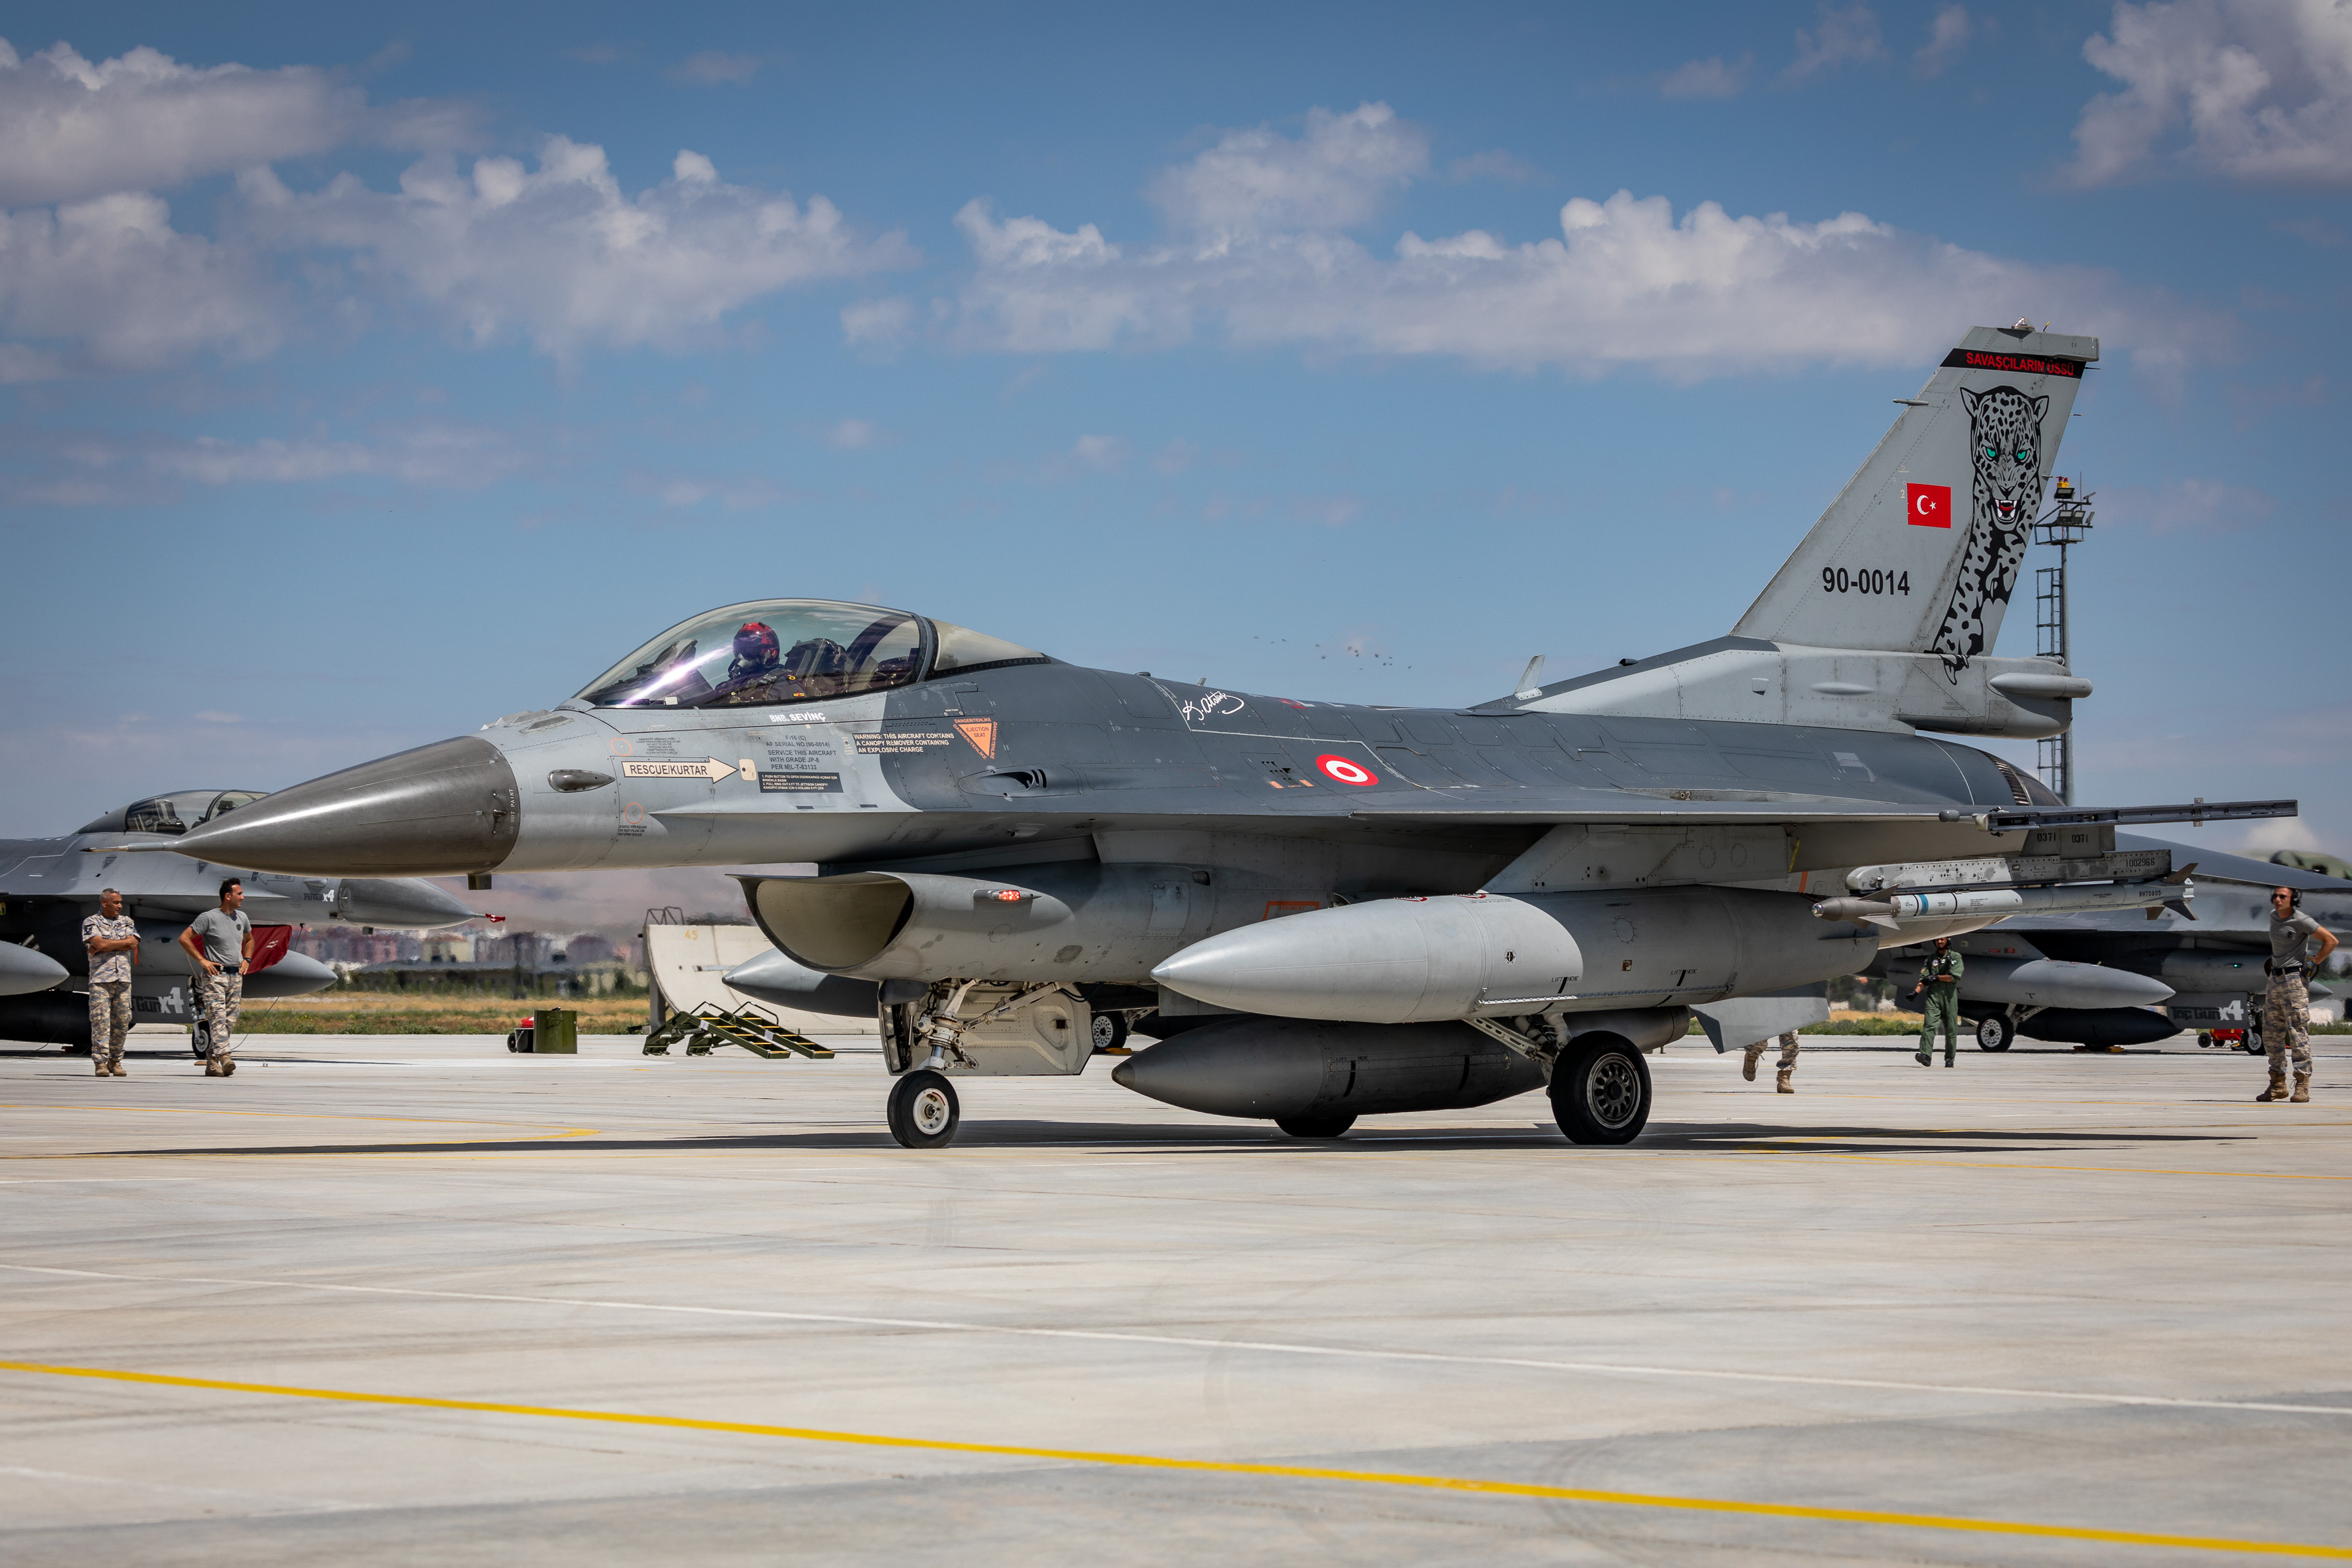 Image shows a Turkish aircraft on the airfield.